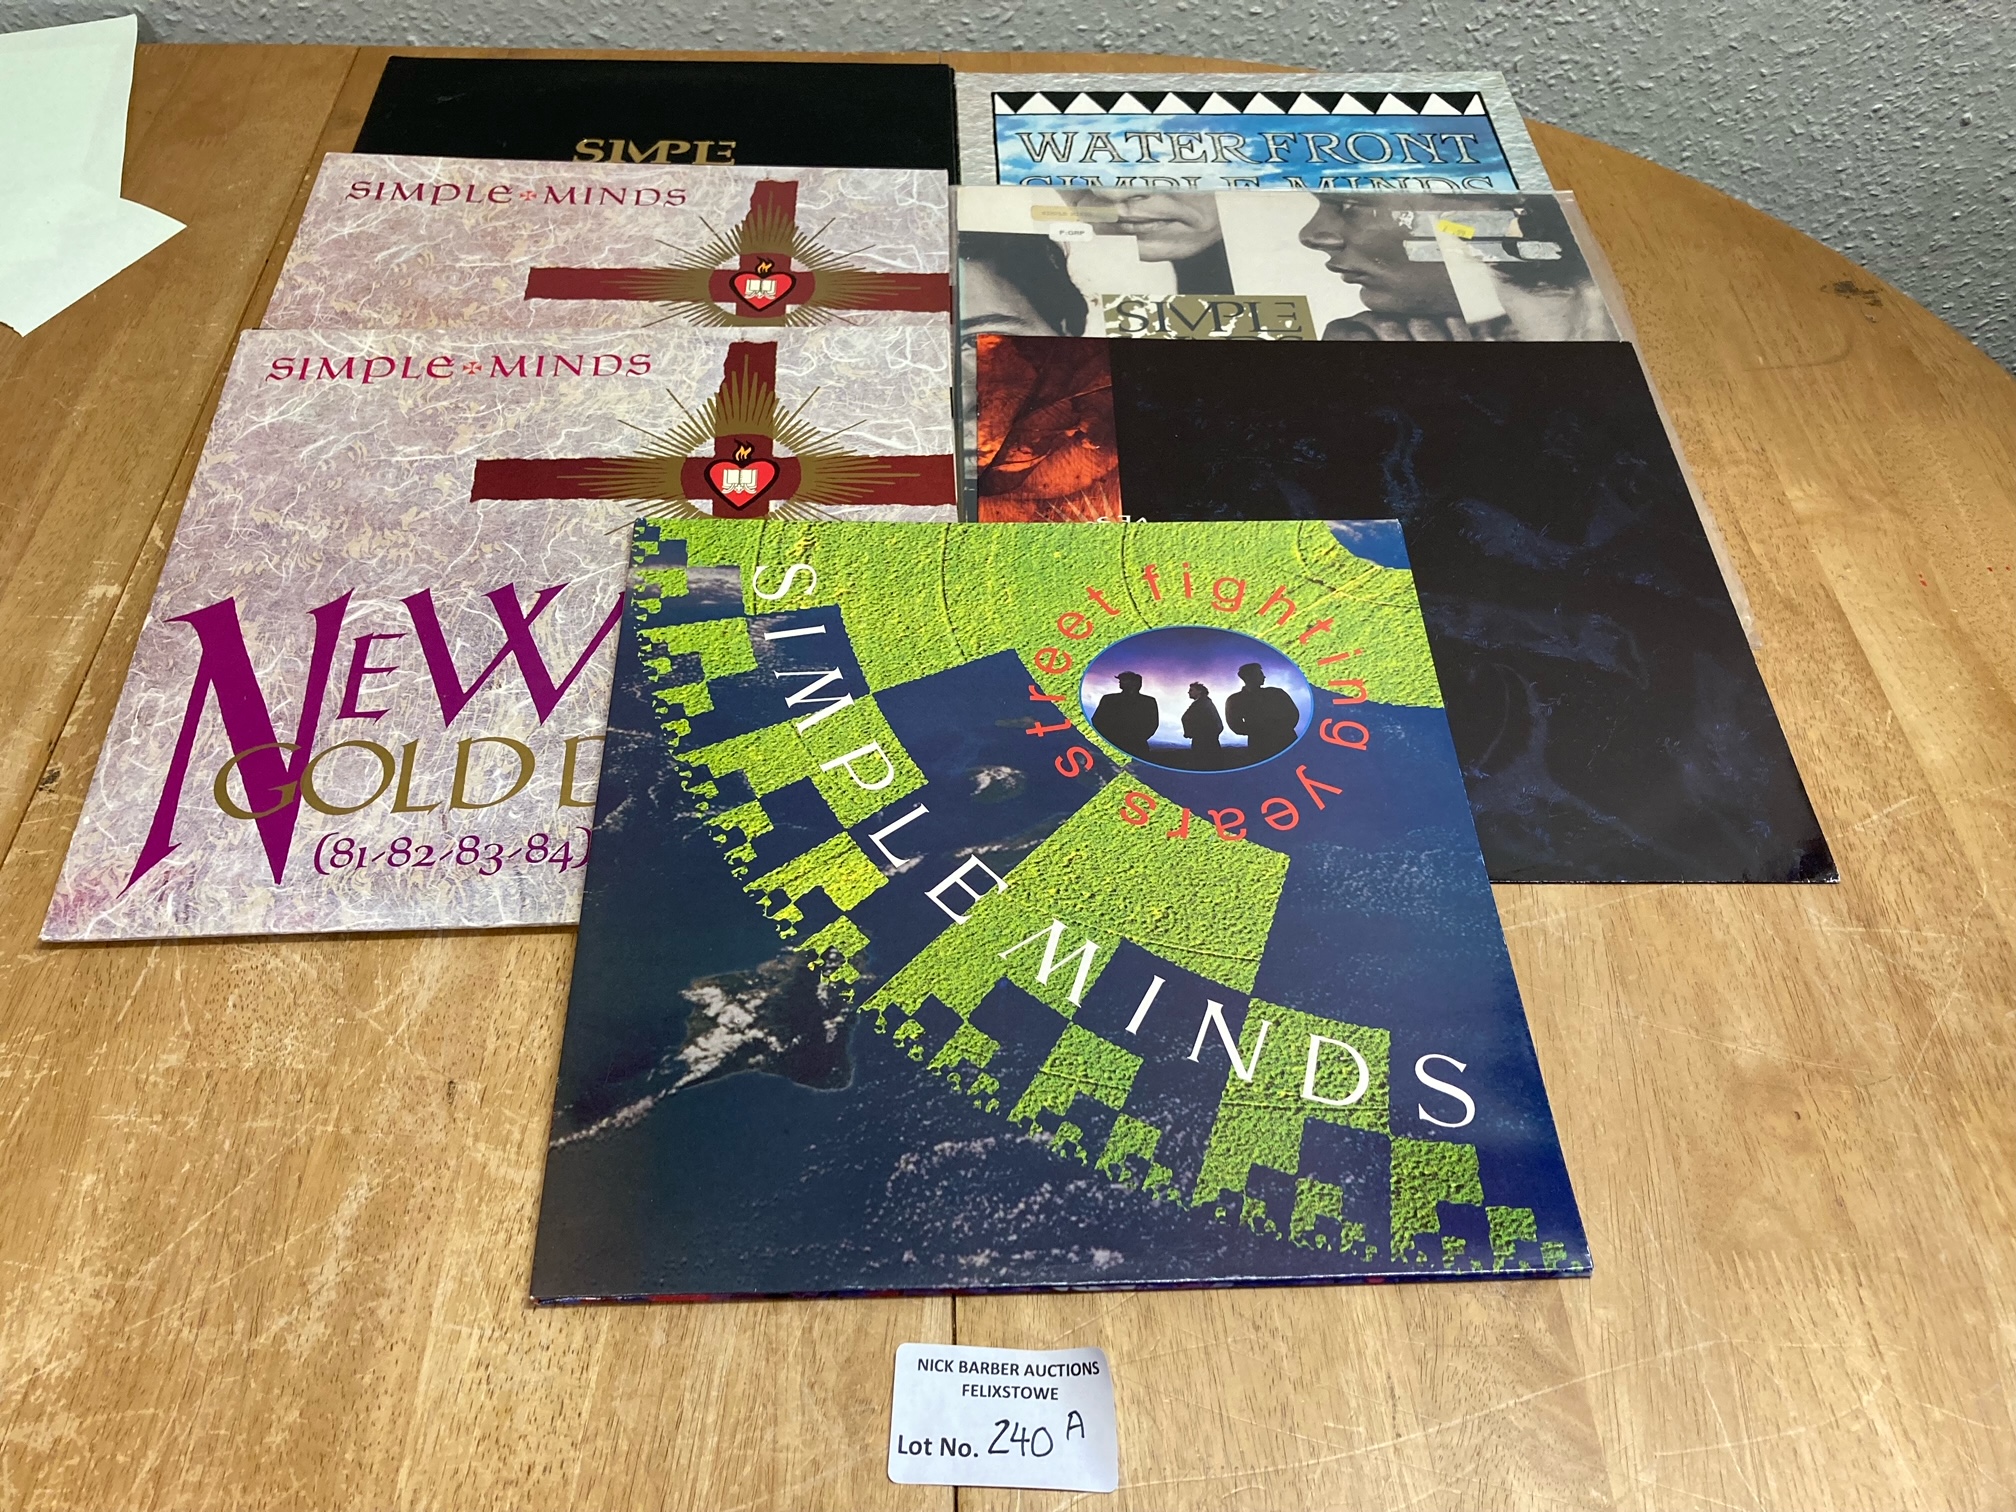 Records : 9 Simple Minds albums in fine condition